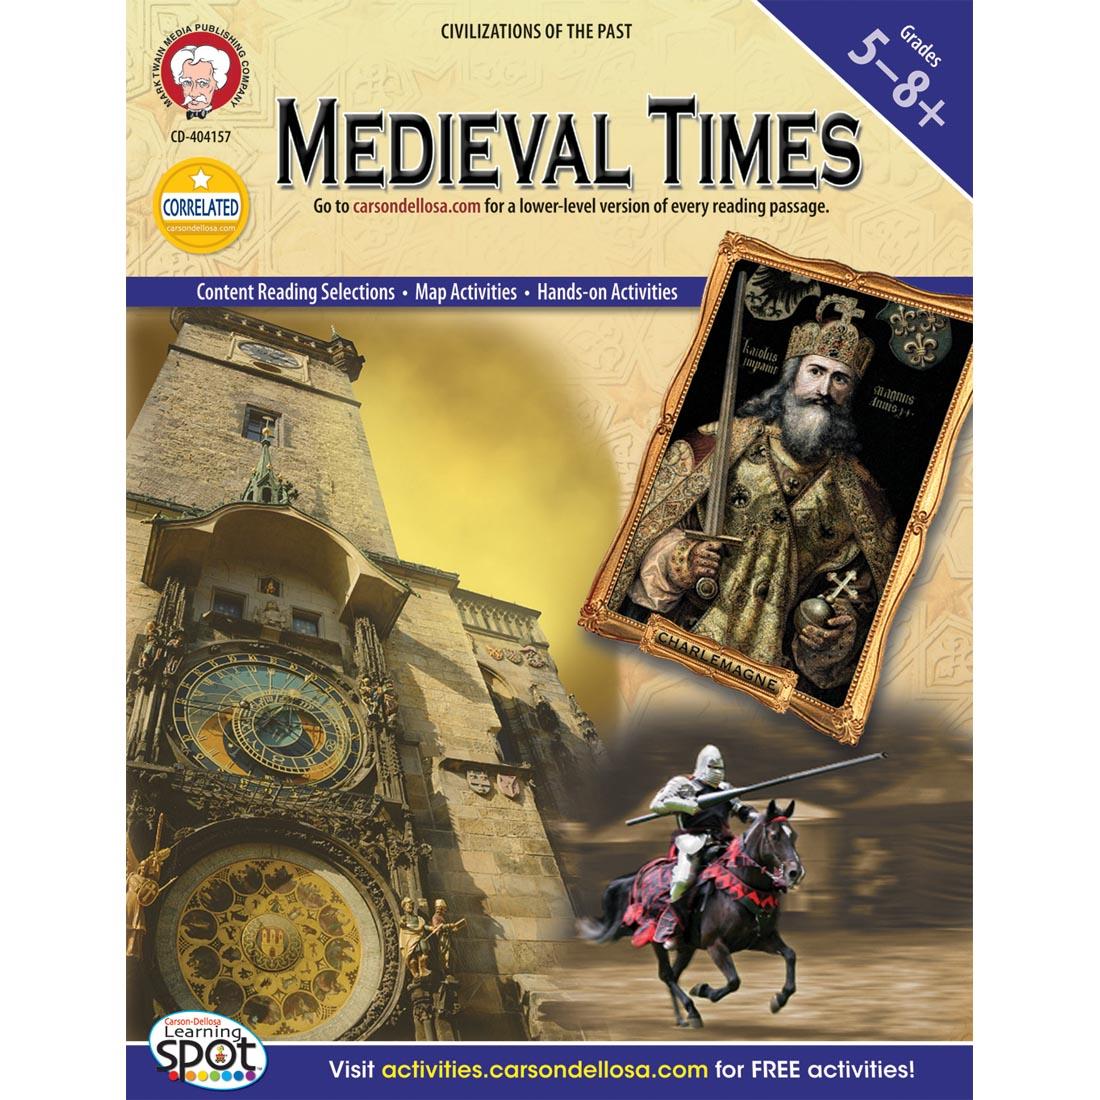 Medieval Times Book by Mark Twain Media